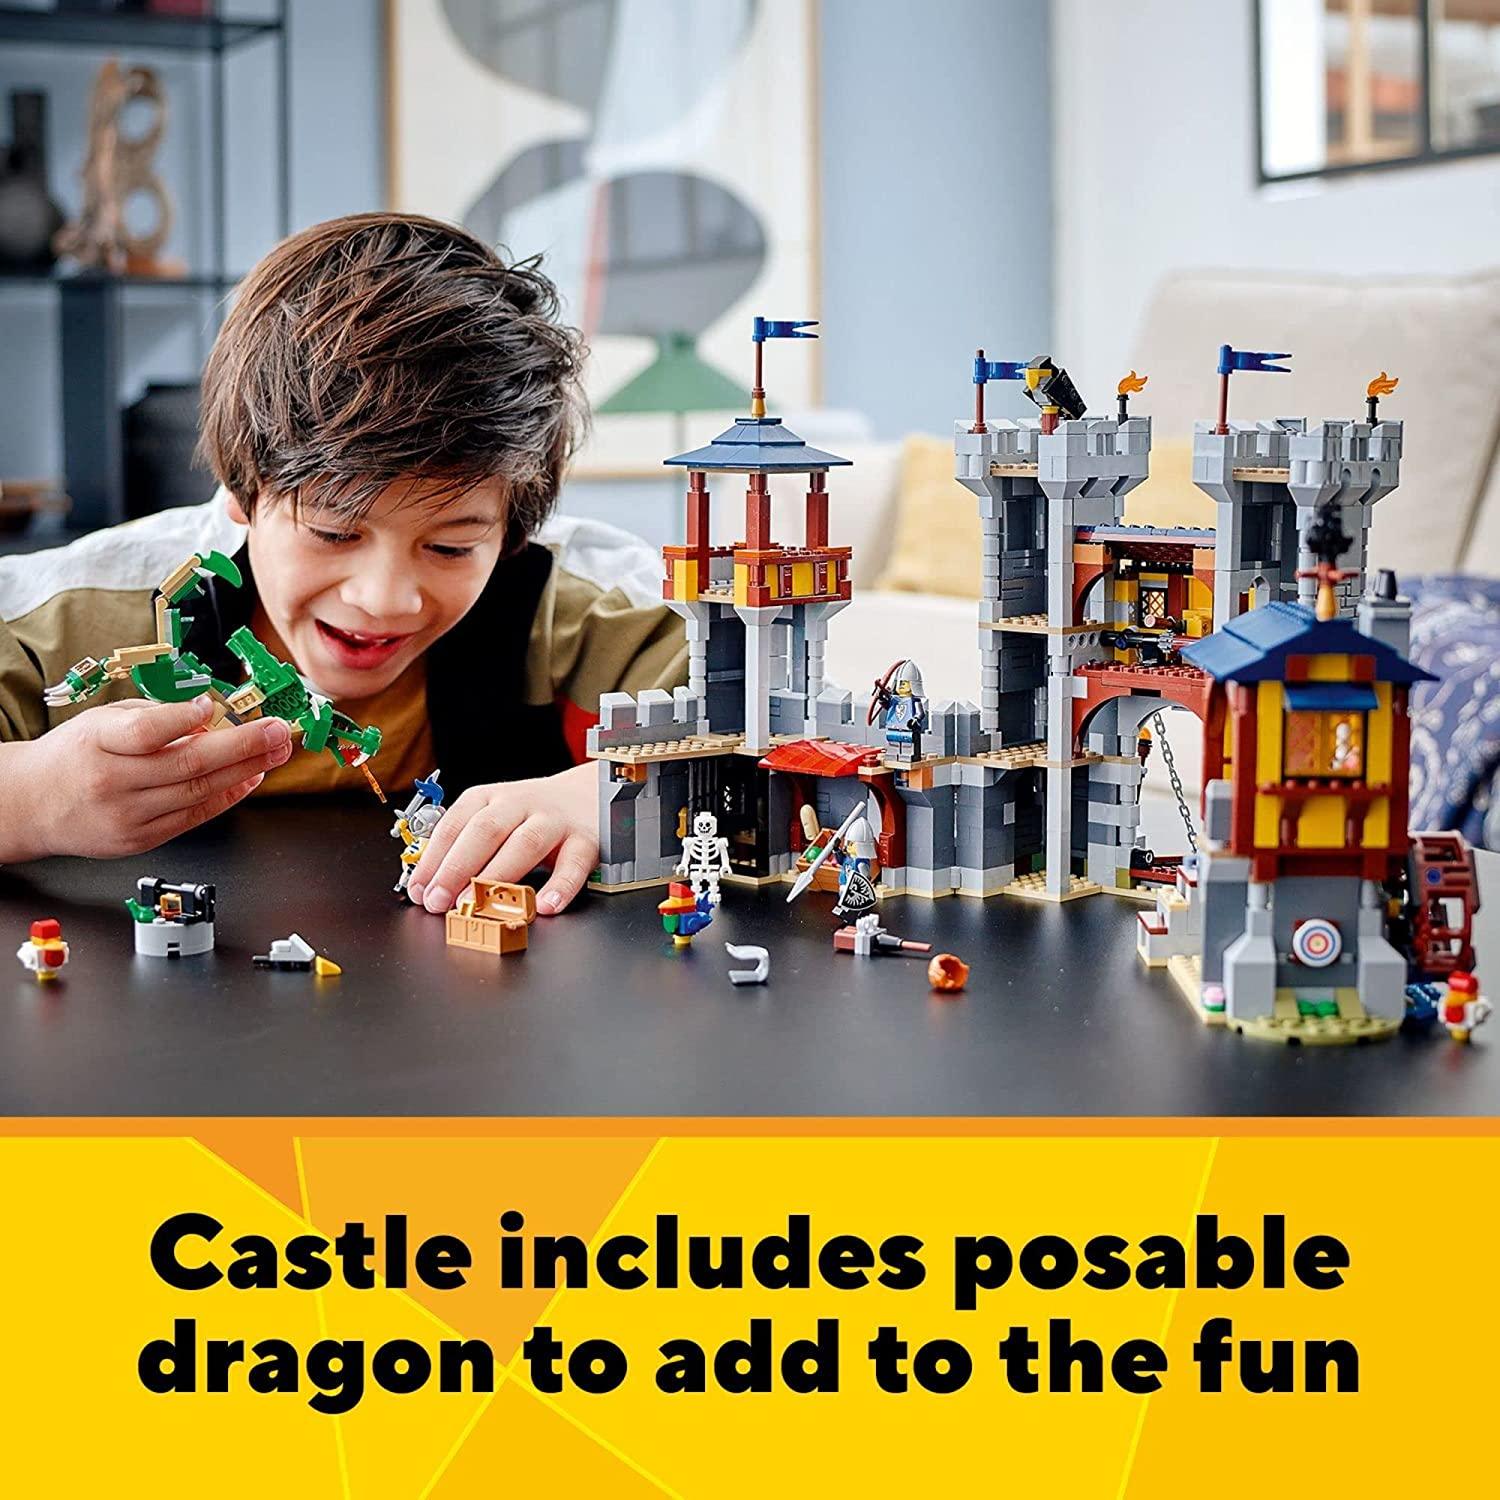 LEGO Creator 3in1 Medieval Castle Building Kit for Ages 9+ - FunCorp India